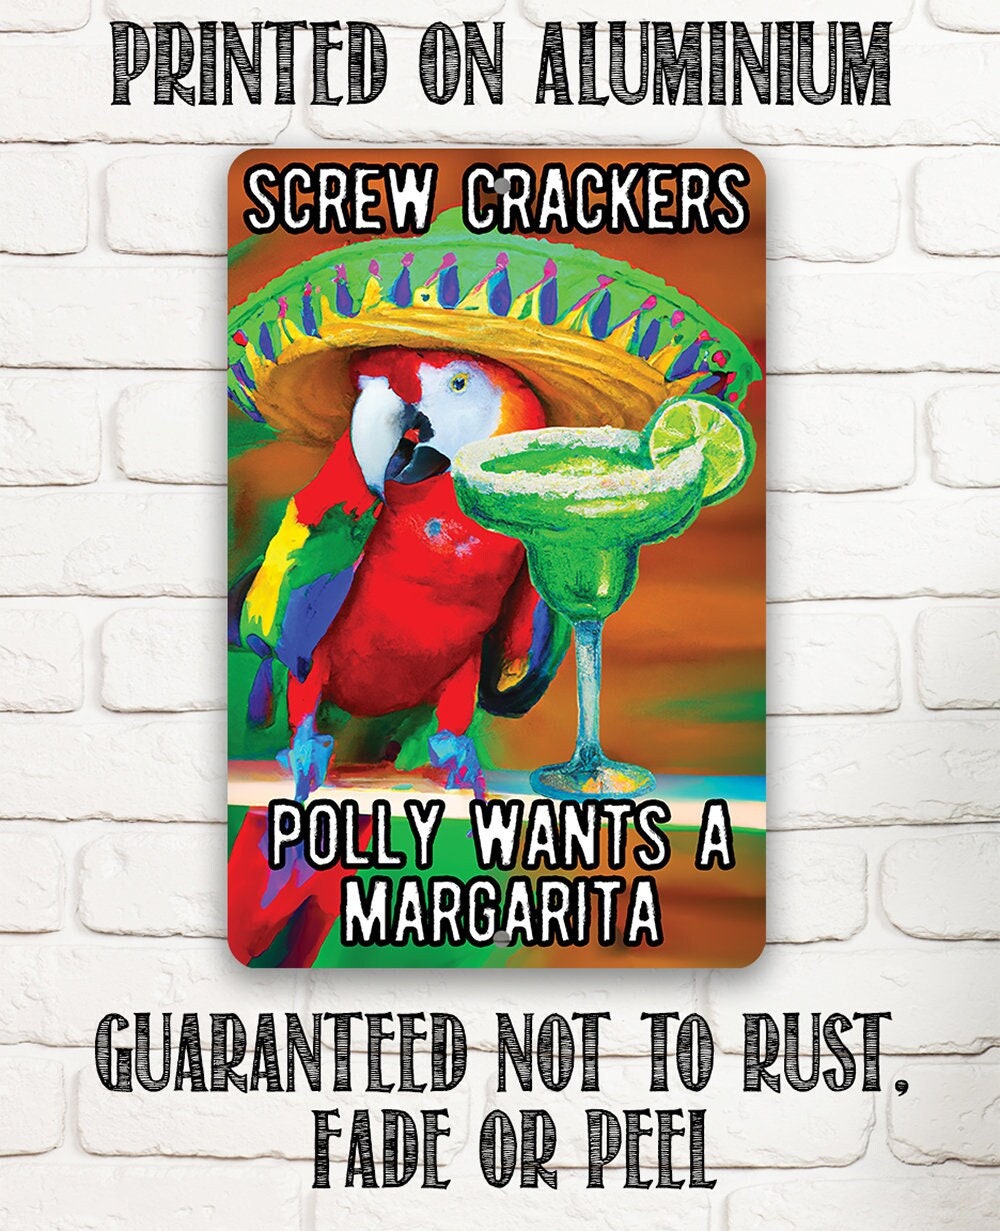 Screw Crackers Polly Wants a Margarita - 8" x 12" or 12" x 18" Aluminum Tin Awesome Metal Poster Metal Sign Lone Star Art 